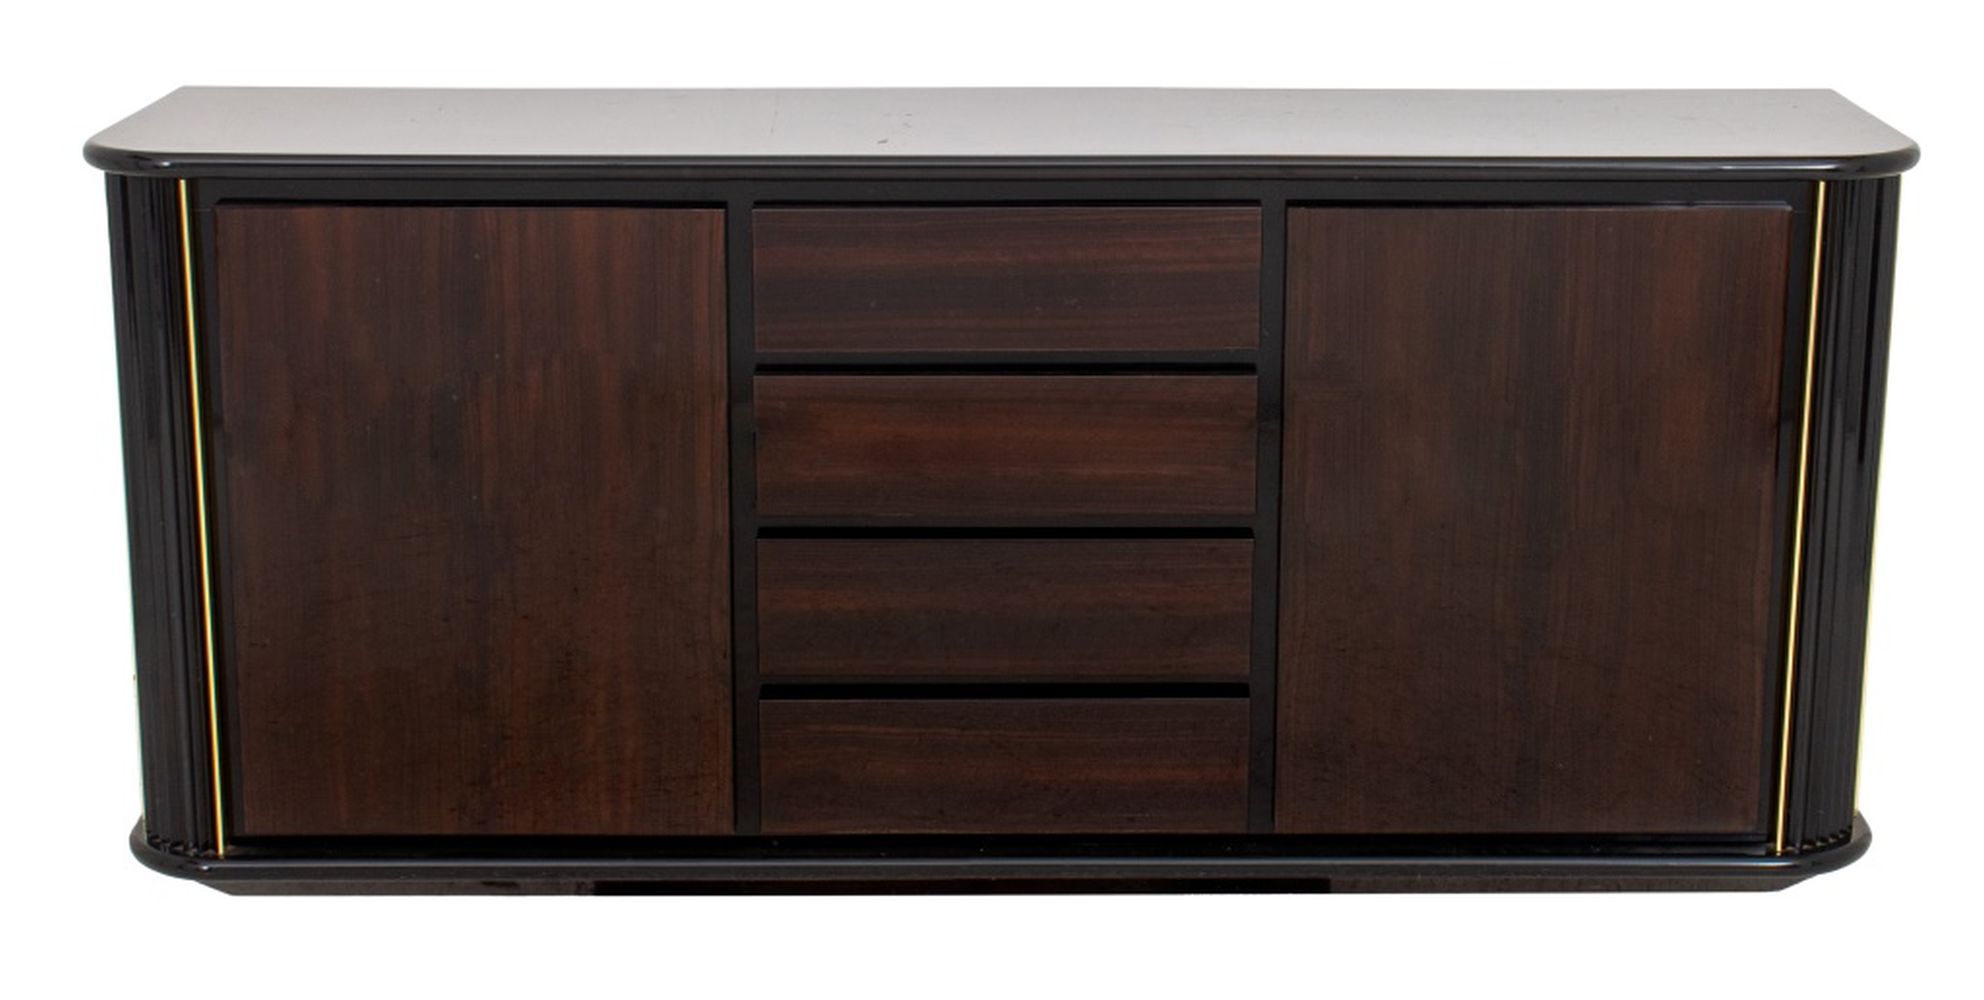 ITALIAN LACQUERED FAUX ROSEWOOD